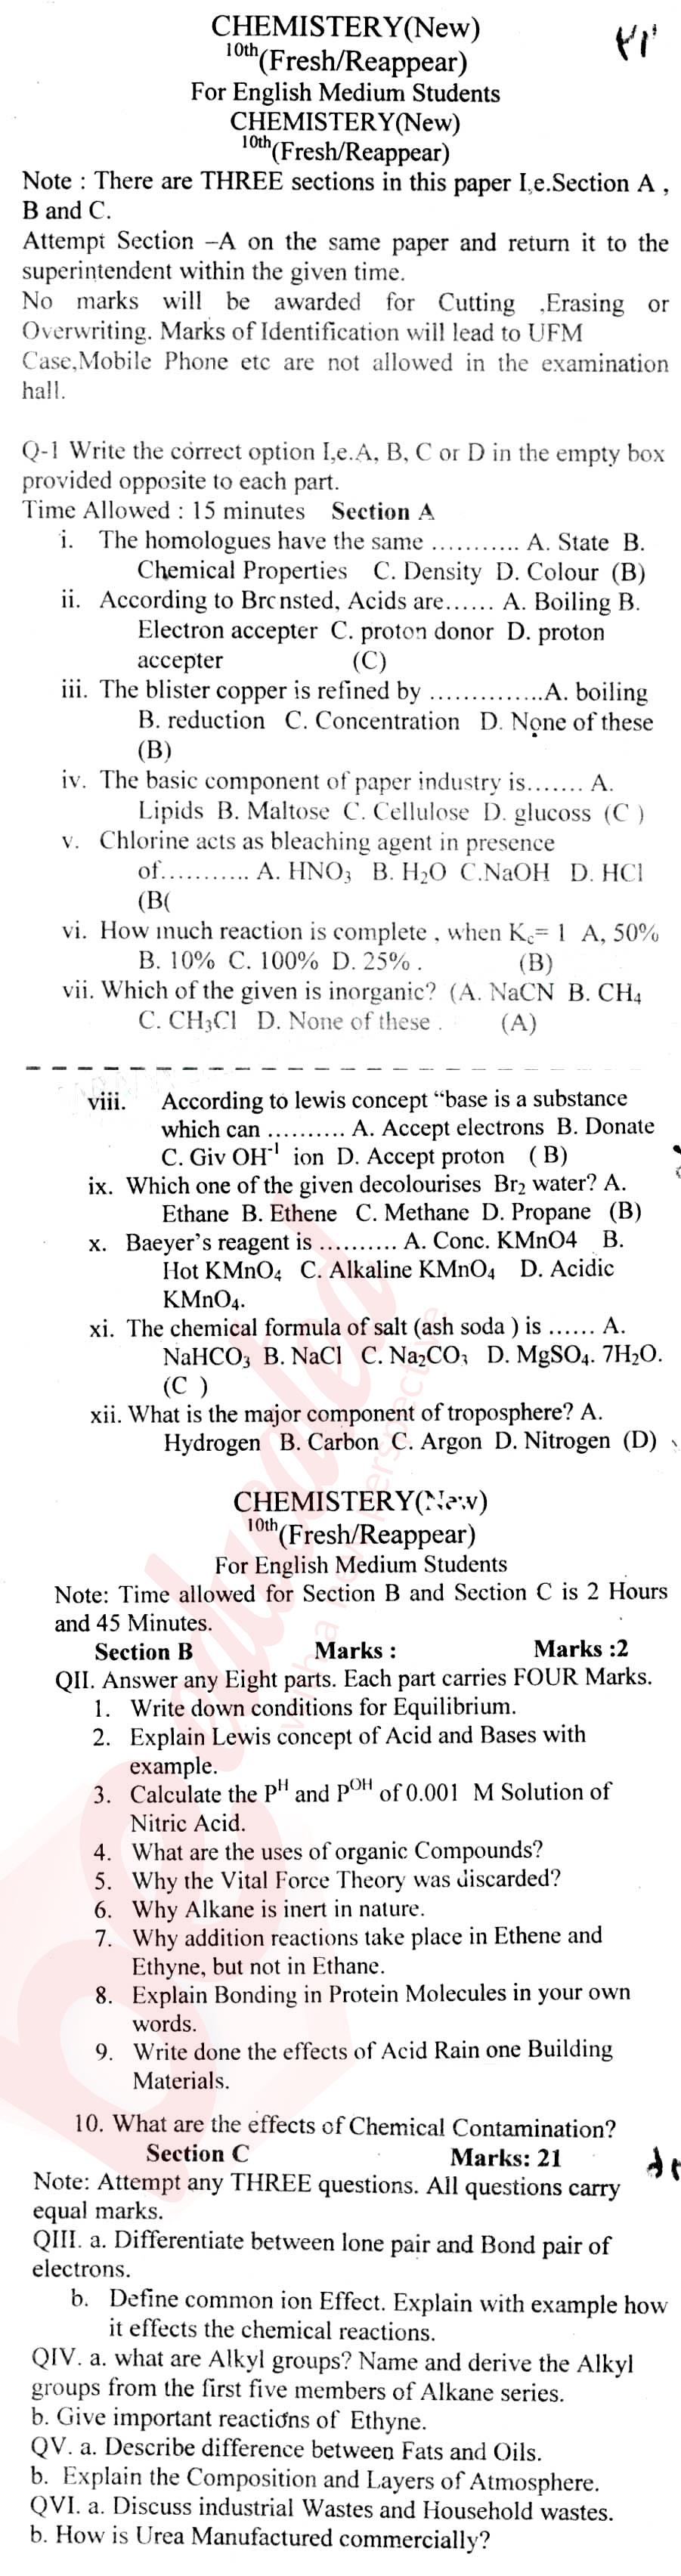 Chemistry 10th English Medium Past Paper Group 1 BISE Bannu 2016